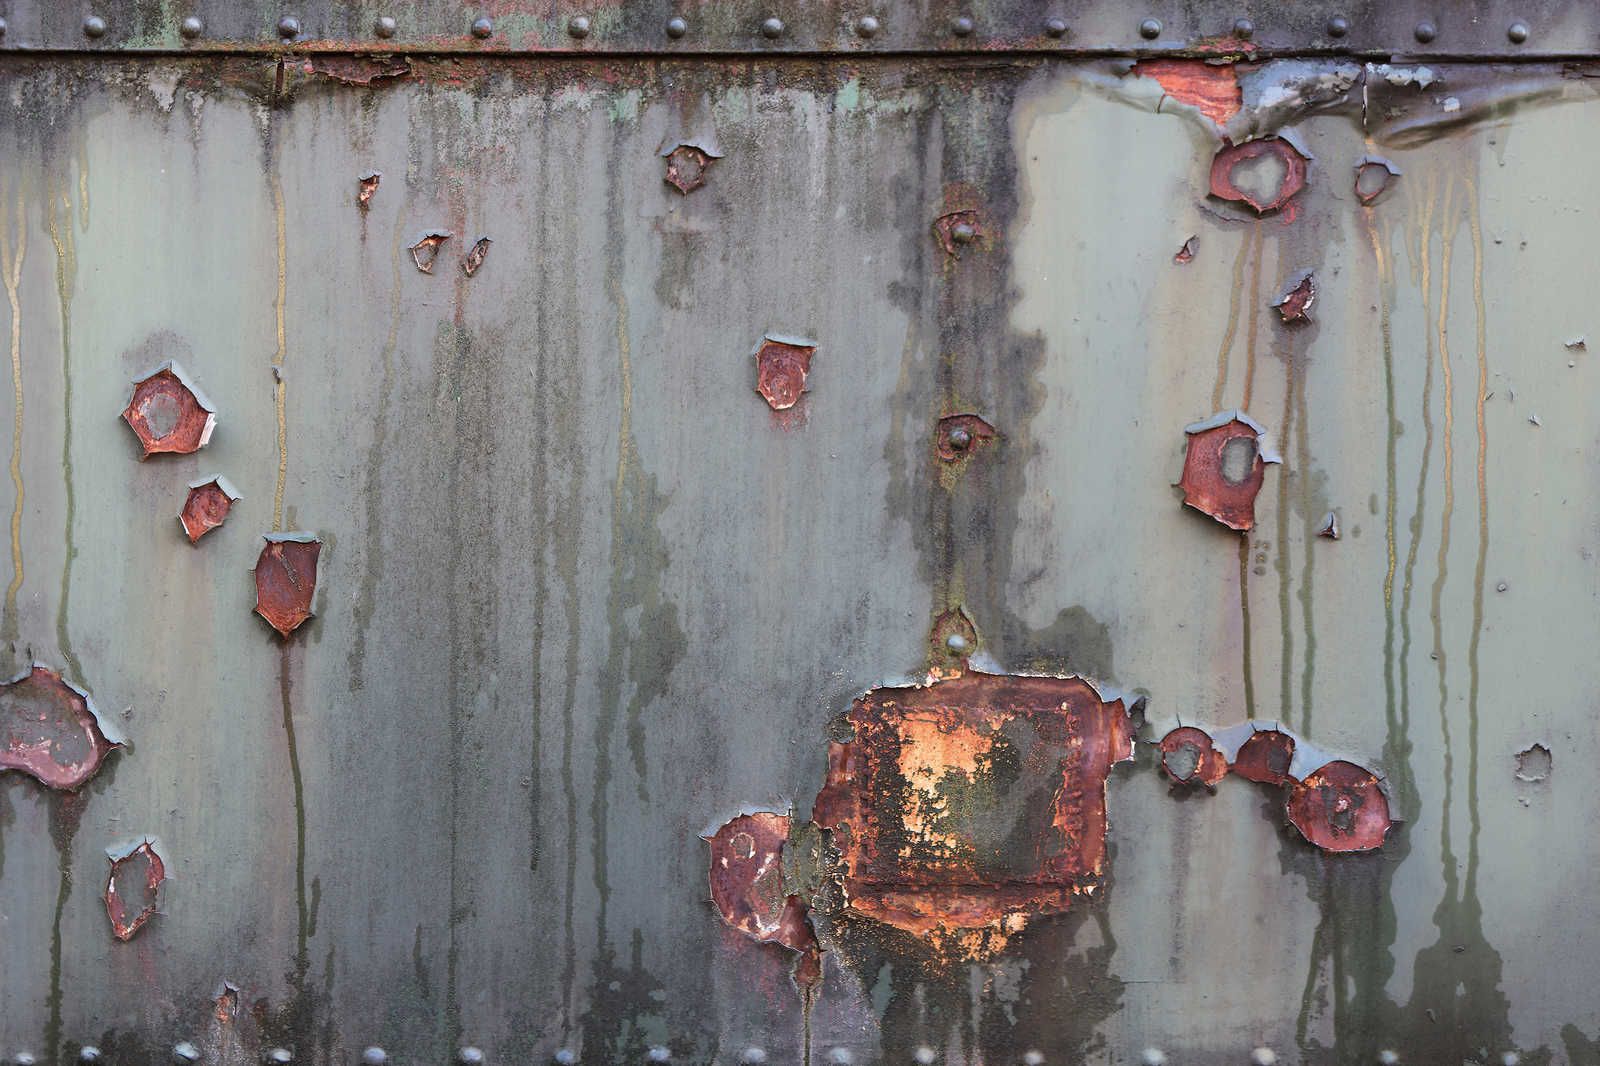             Metal Wall - Canvas painting Industrial with Rust & Used Look - 1.20 m x 0.80 m
        